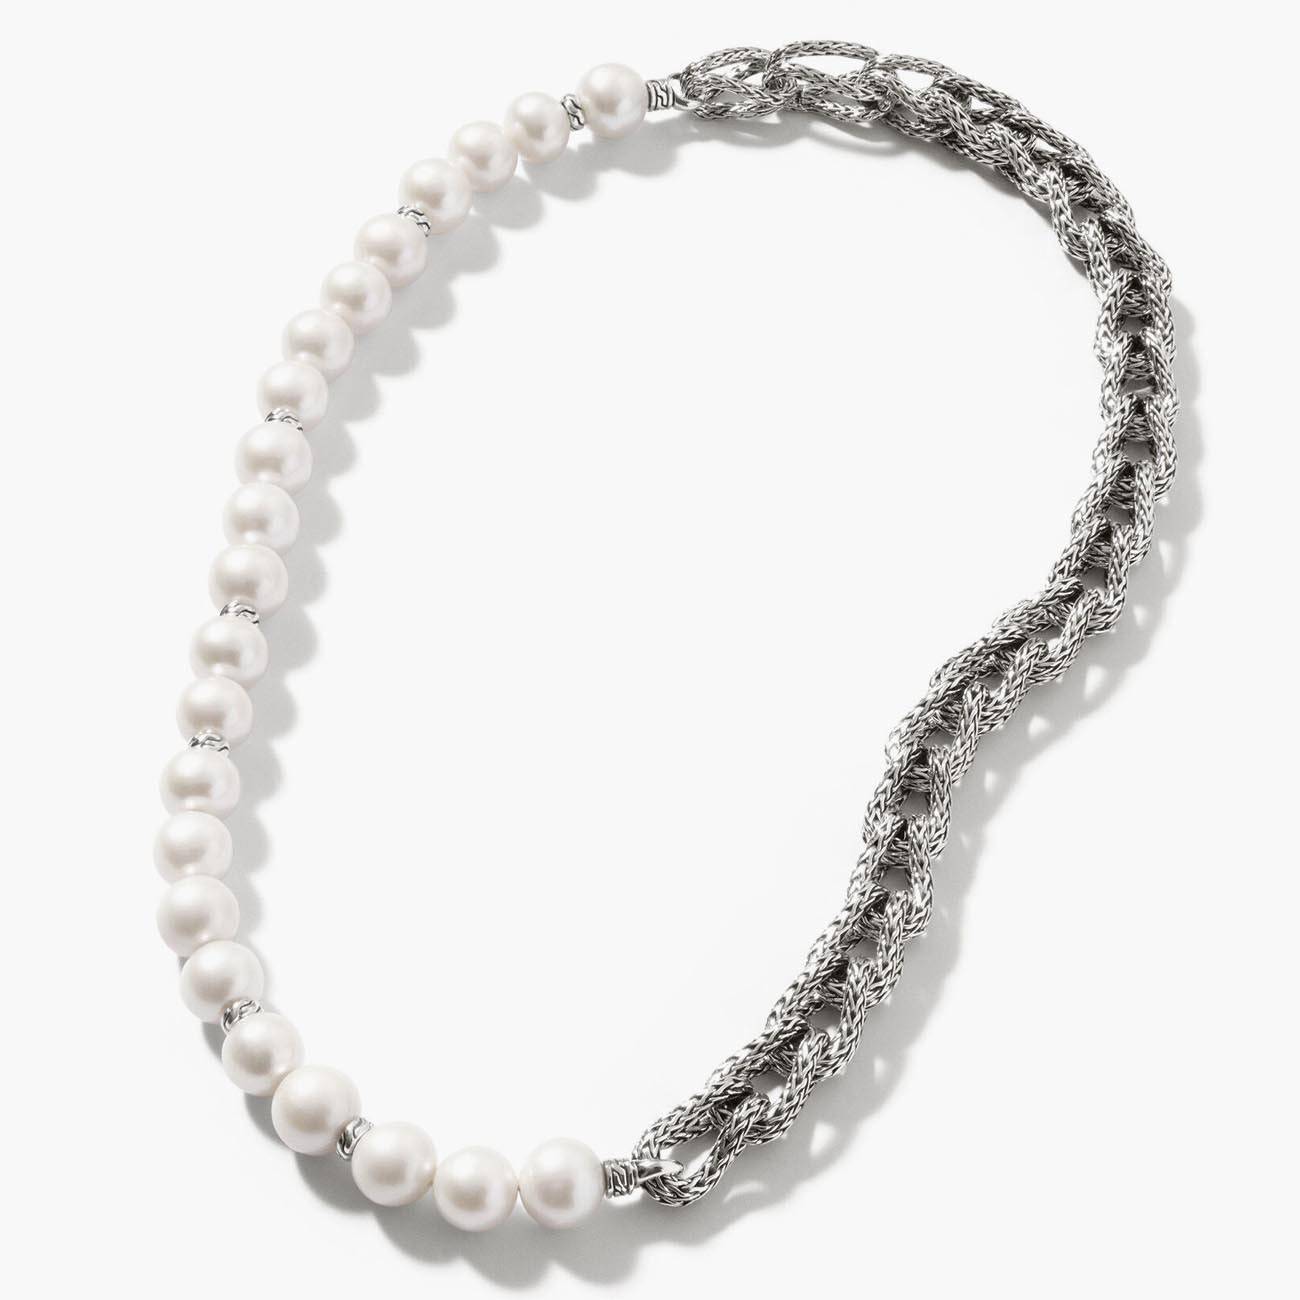 Pearl and Asli Necklace